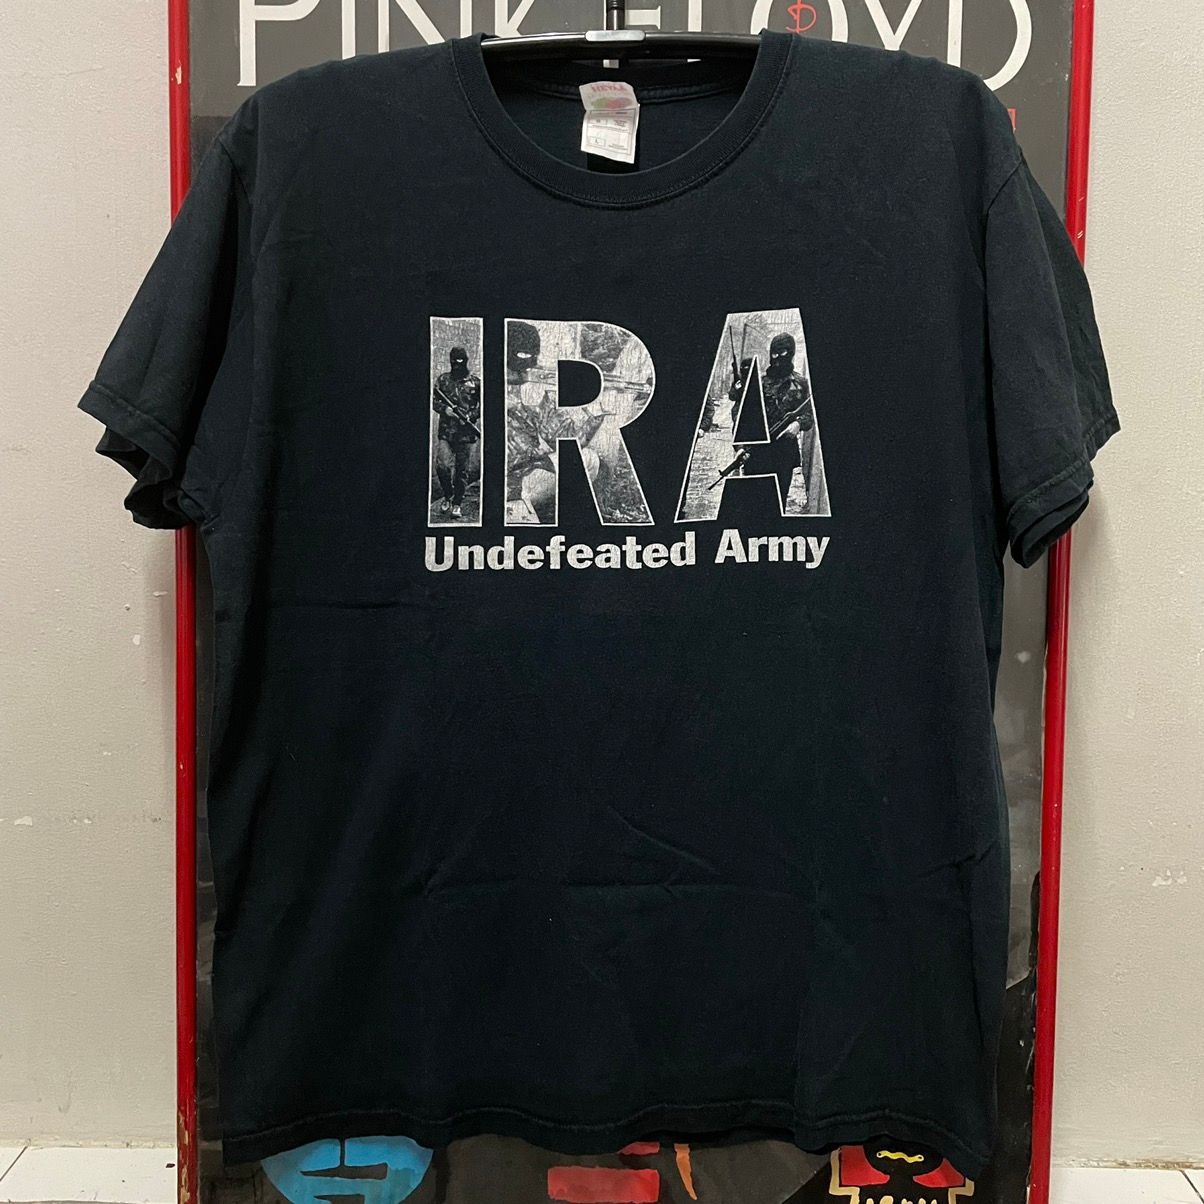 Vintage IRA Undefeated Army t shirt | Grailed